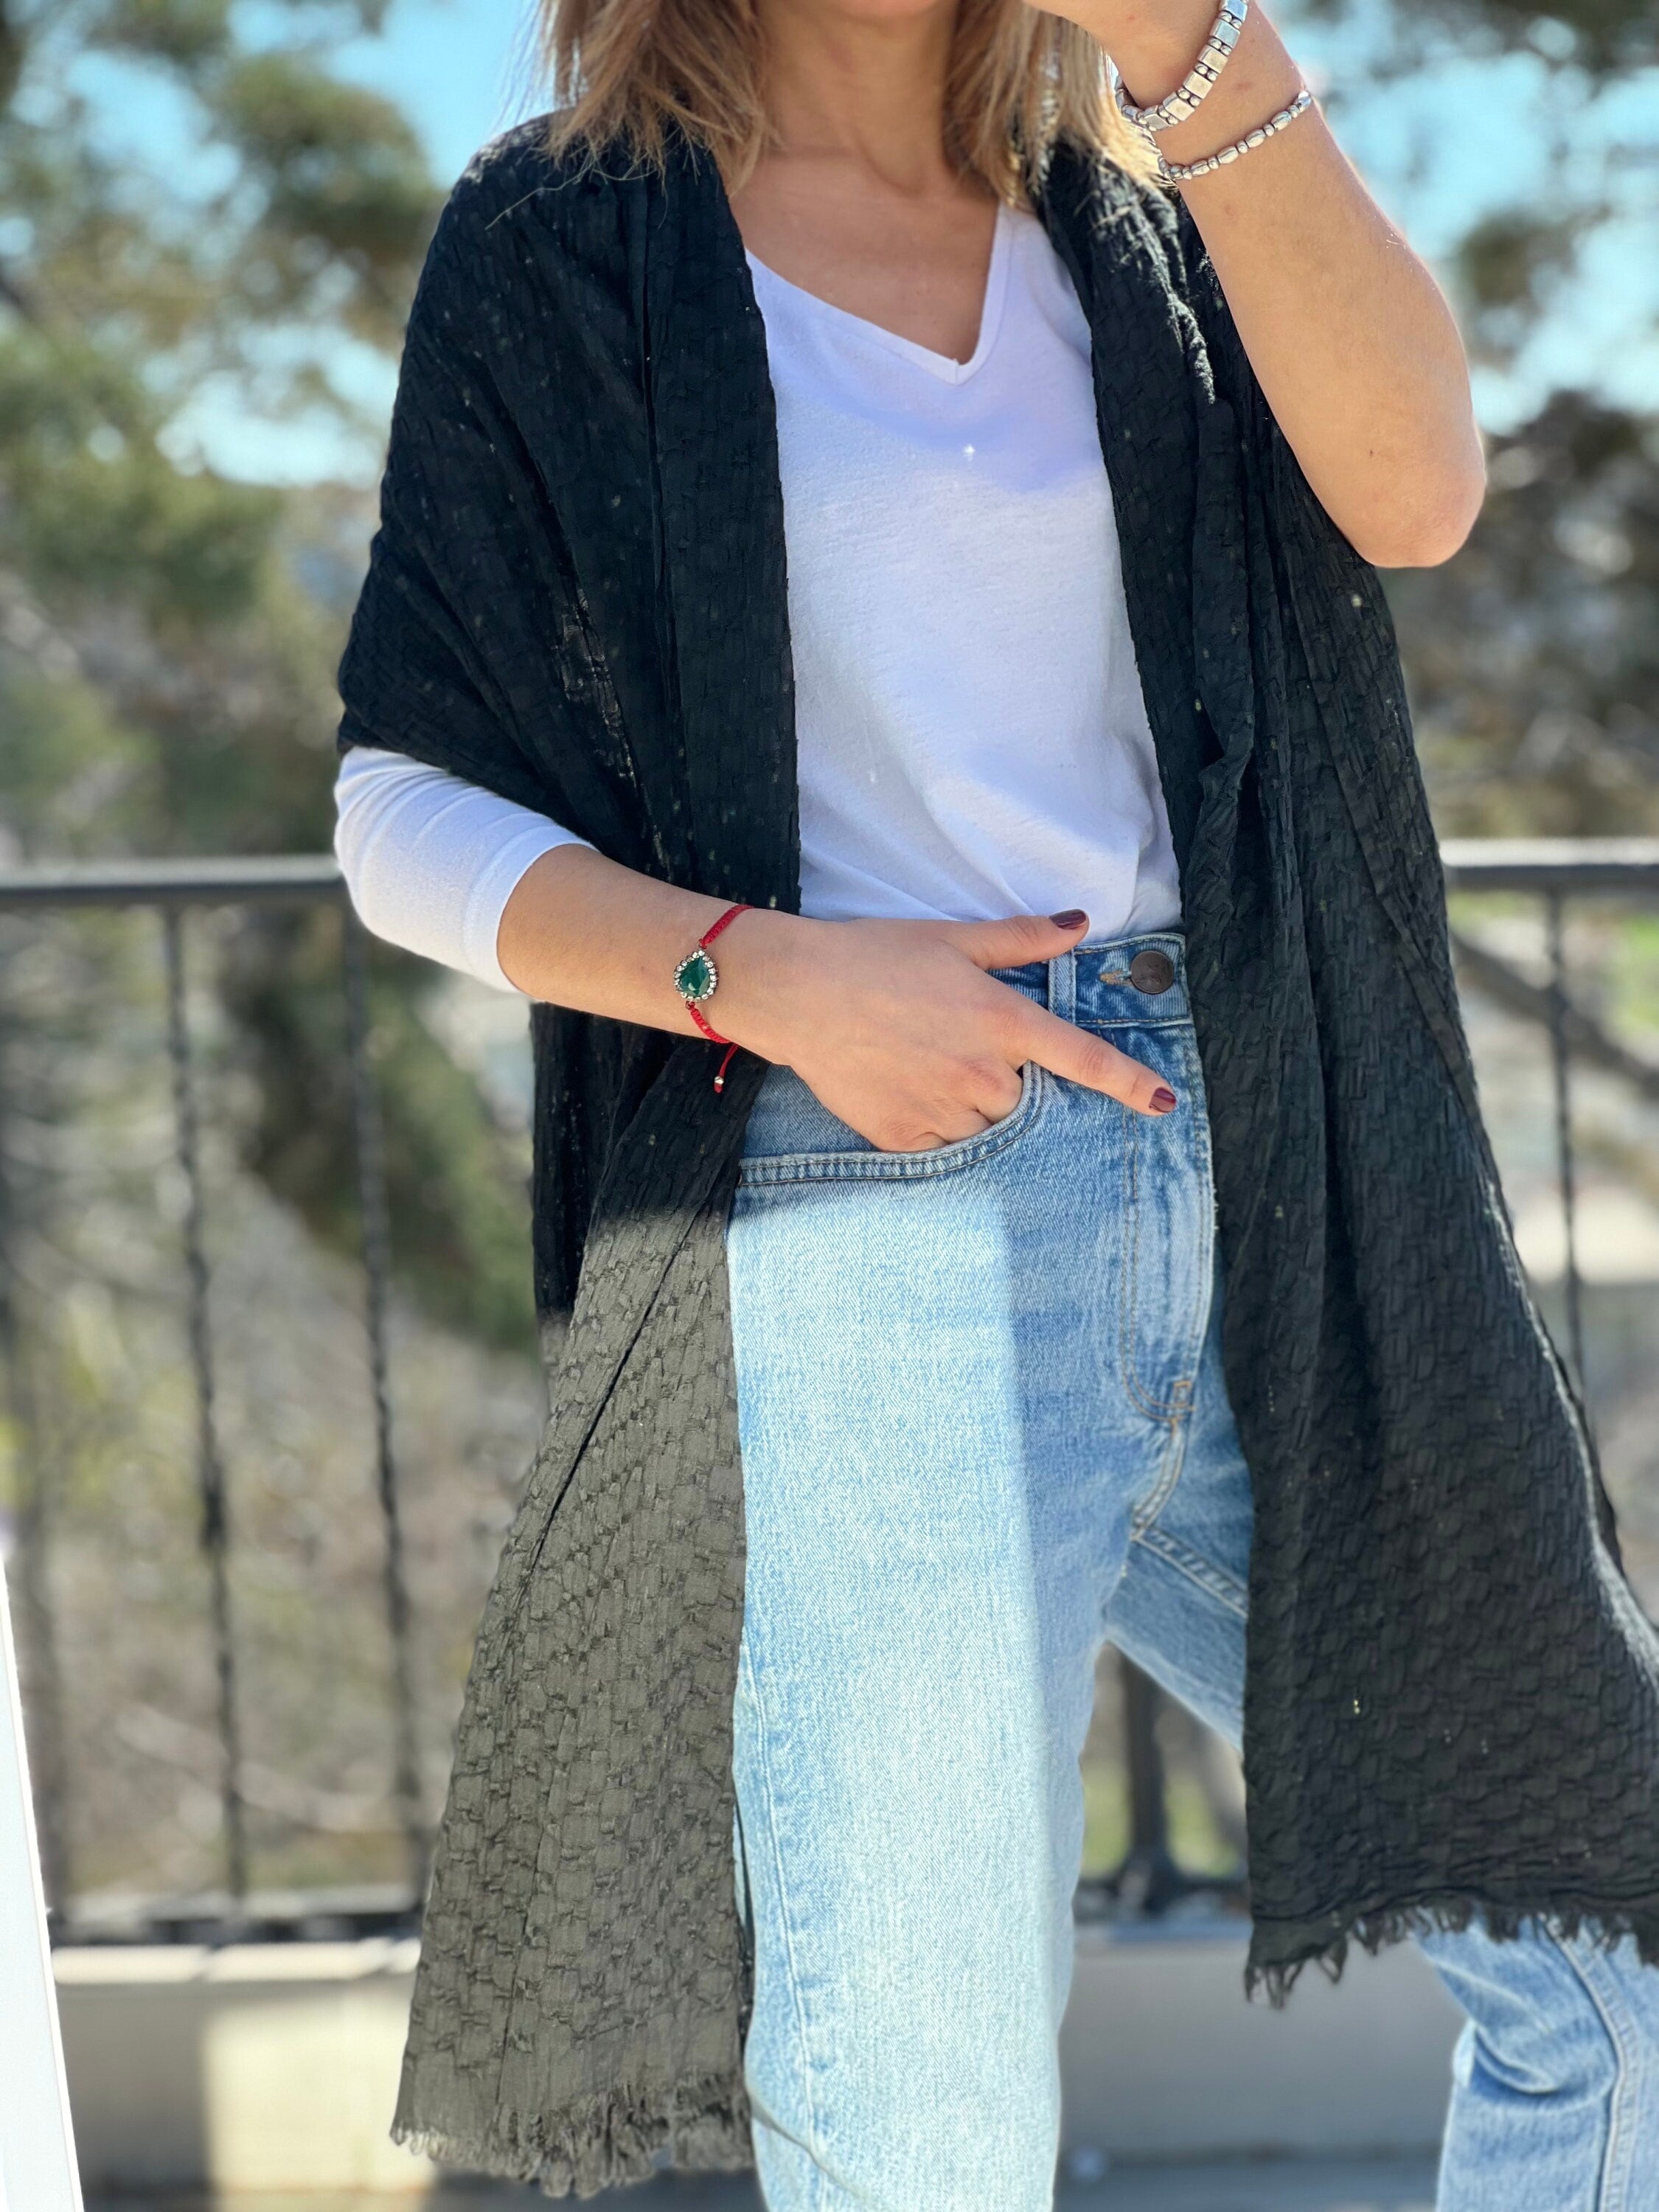 Keep your loved ones close to your heart this winter with a large square cotton scarf in dark plain color. This special gift is sure to make her feel loved and special.